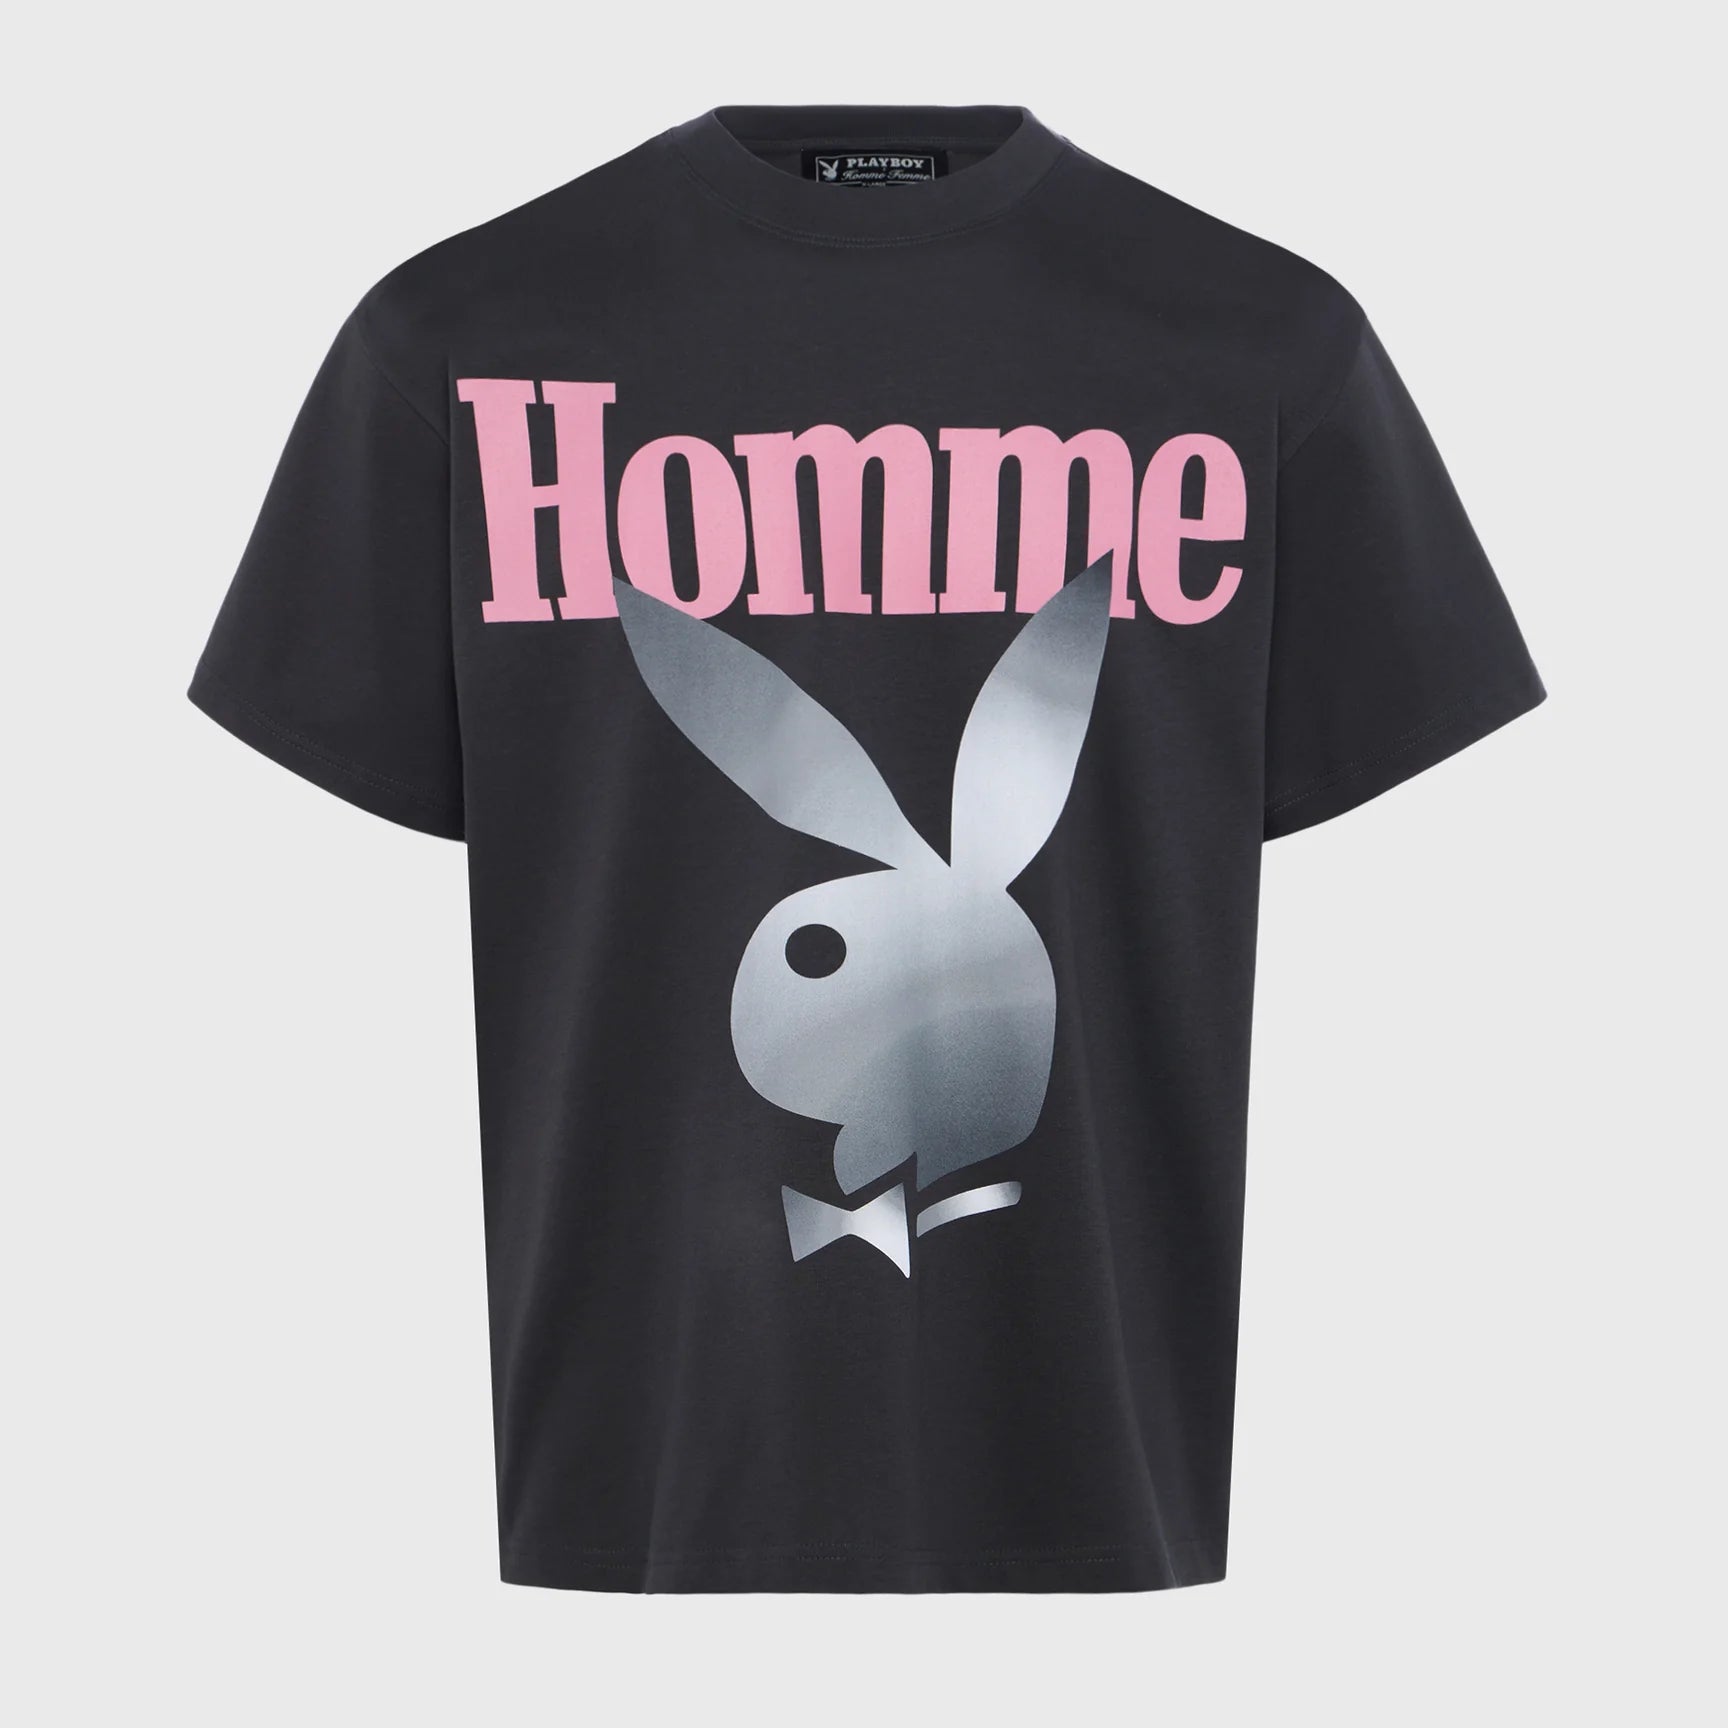 Homme + Femme twisted bunny tee